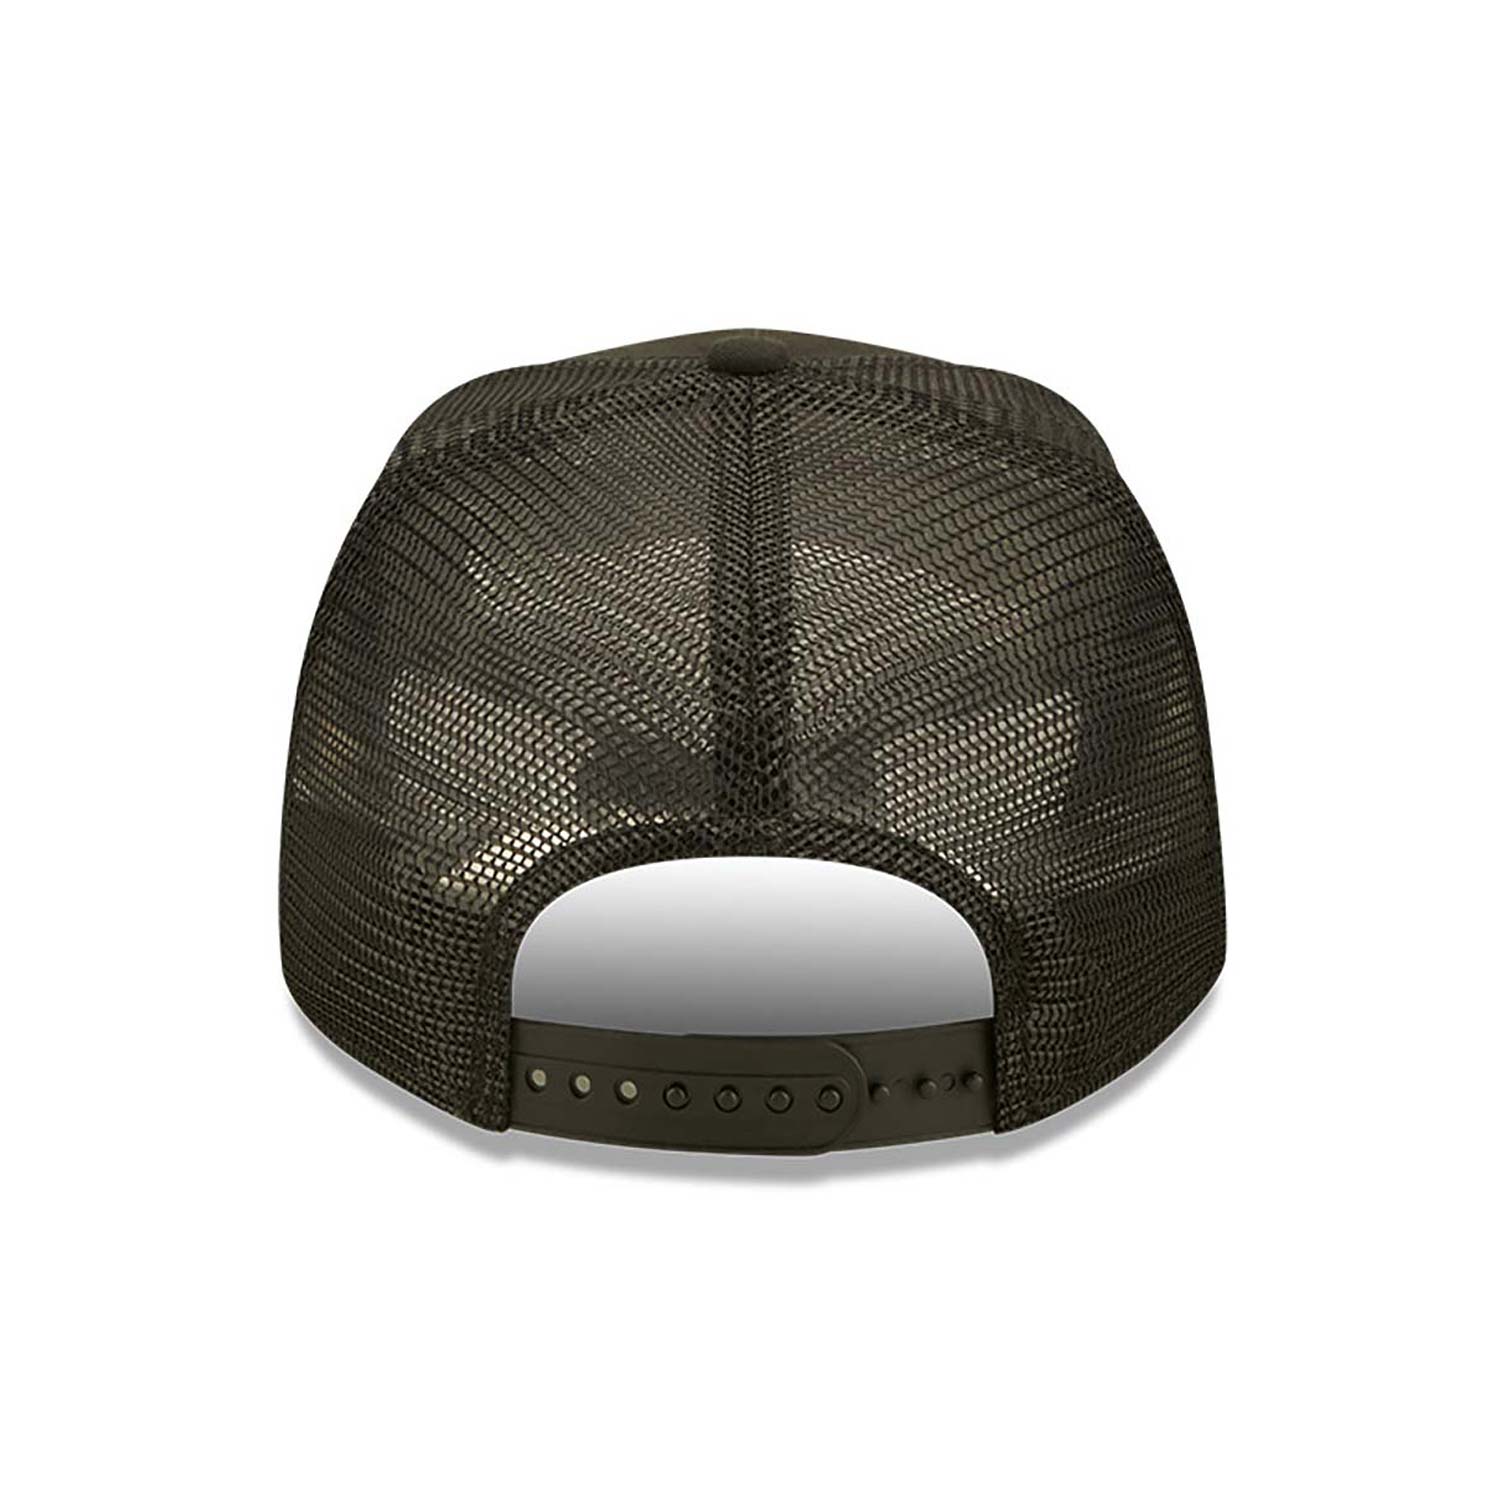 9Forty A-Frame Oval State Trucker Newera - Black/Pink